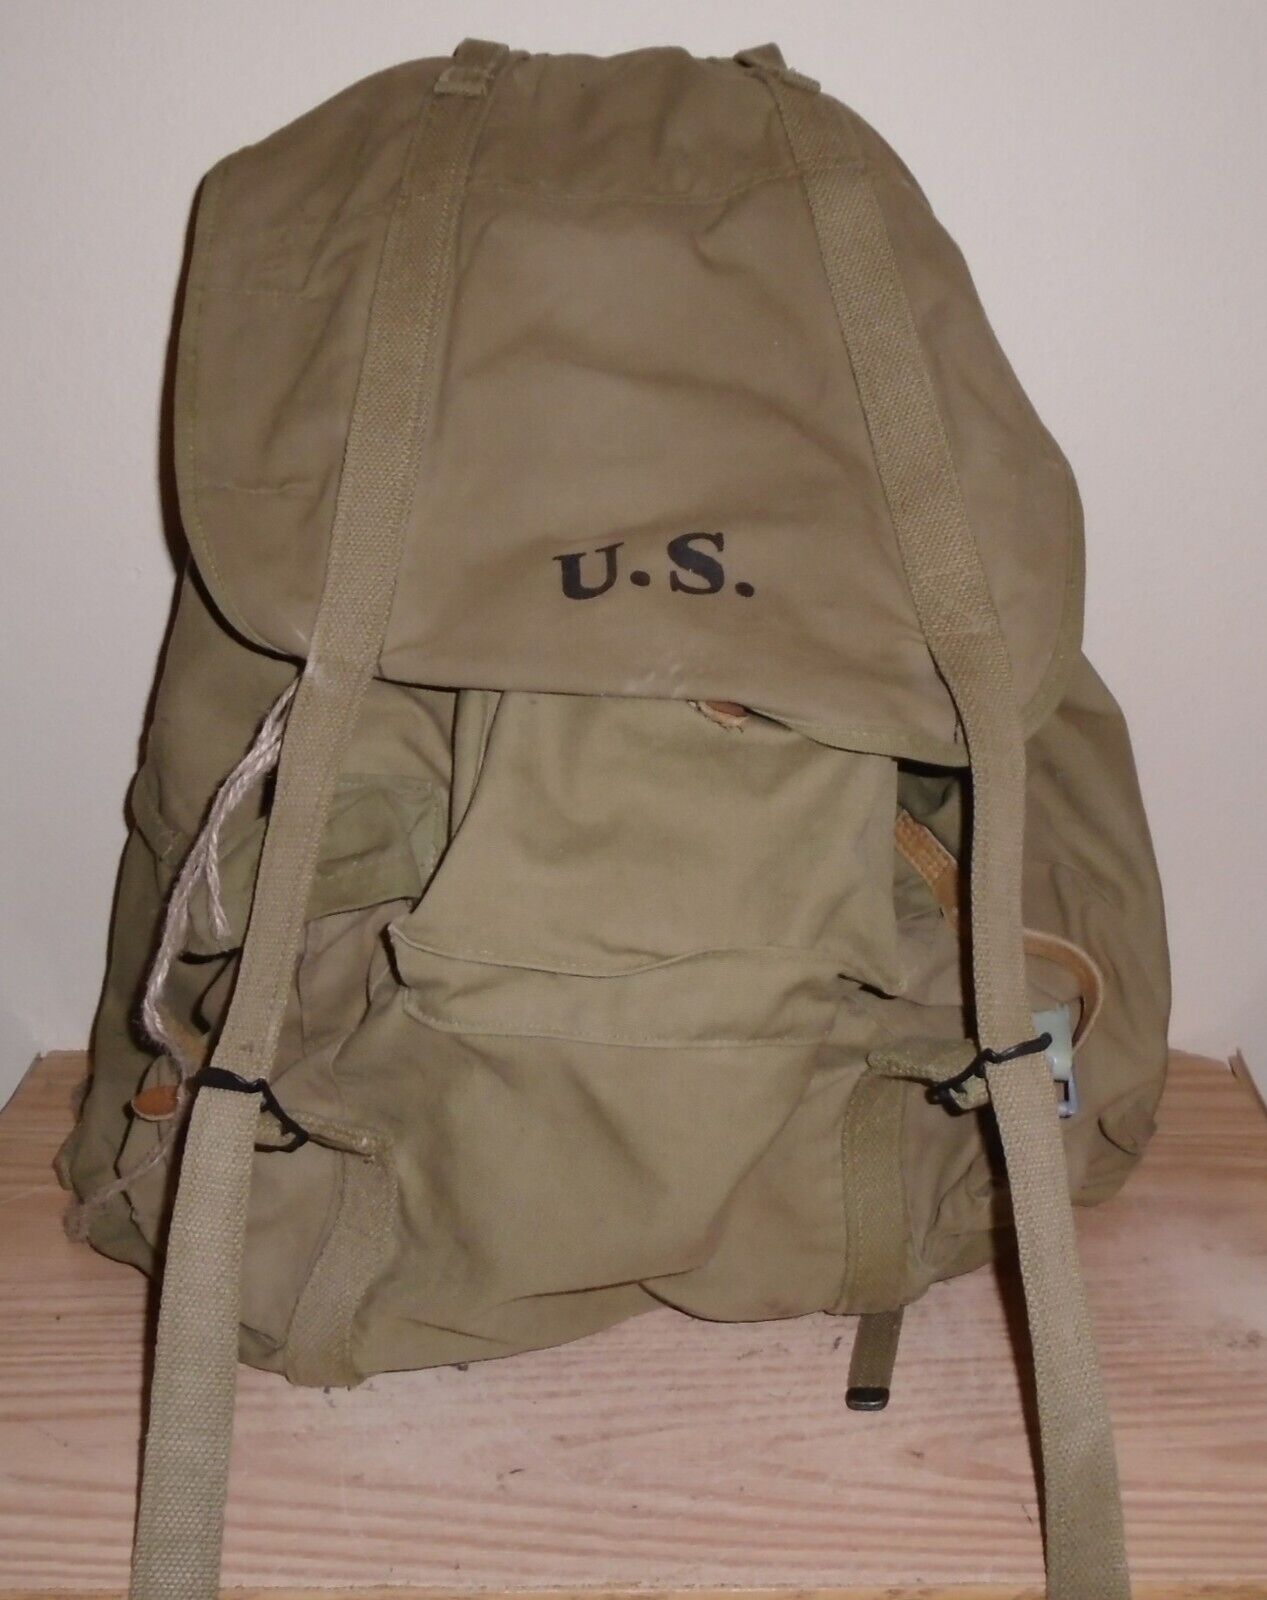 Vintage US Army Military Field Backpack Rucksack Canvas Bag With Frame